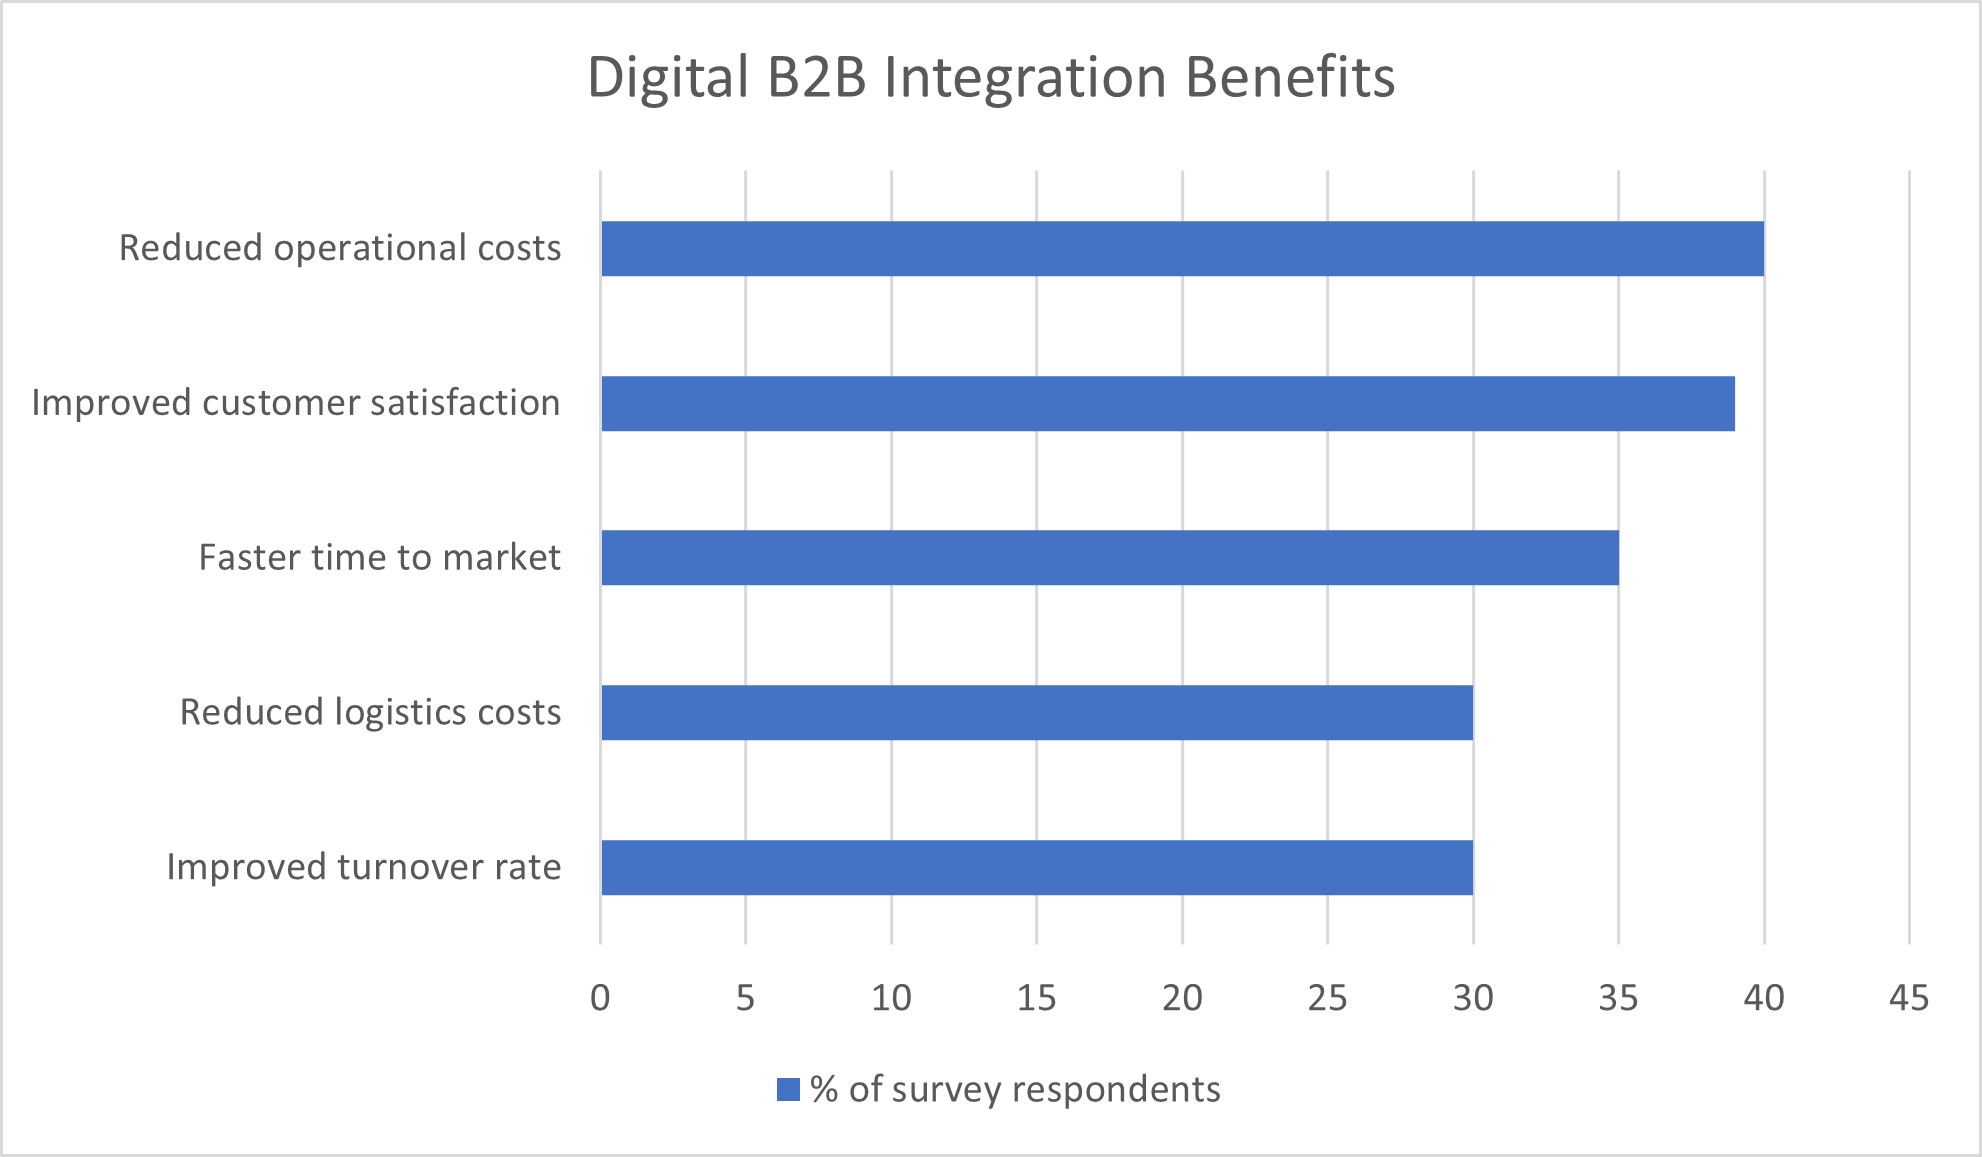 This is an image of survey results regarding Digital B2B Integration Benefits indicating that reduced operational costs and improved customer satisfaction are among the top benefits. 